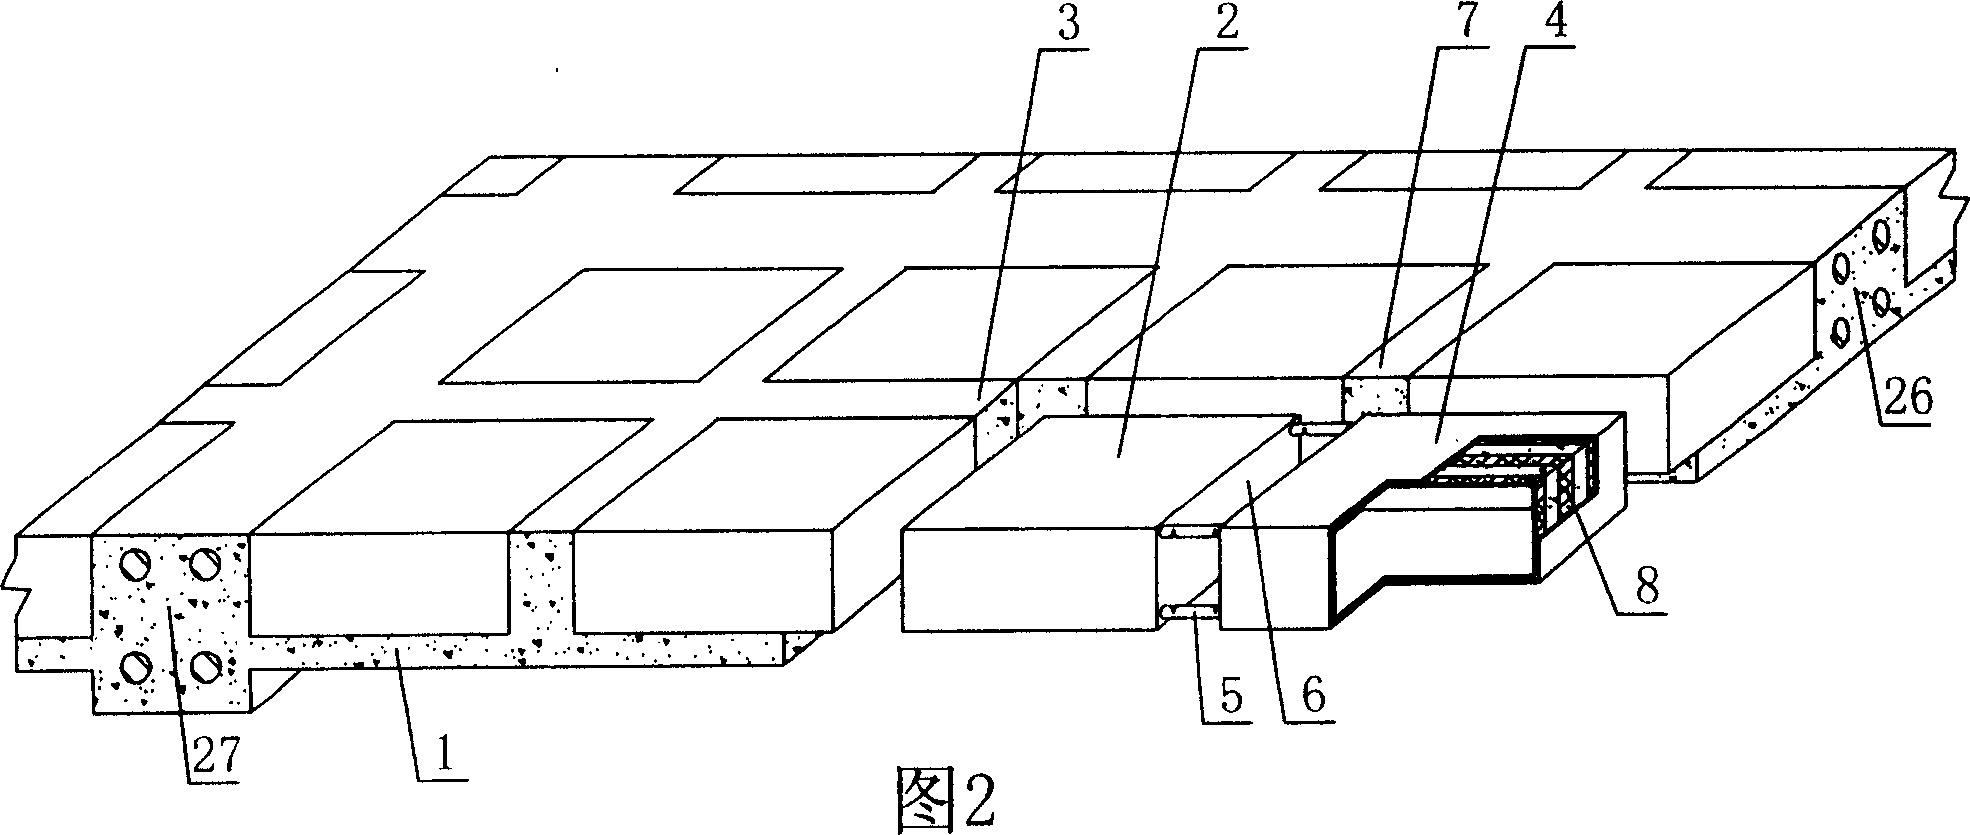 Hollow plate fabricated from reinforcing steel bar concrete